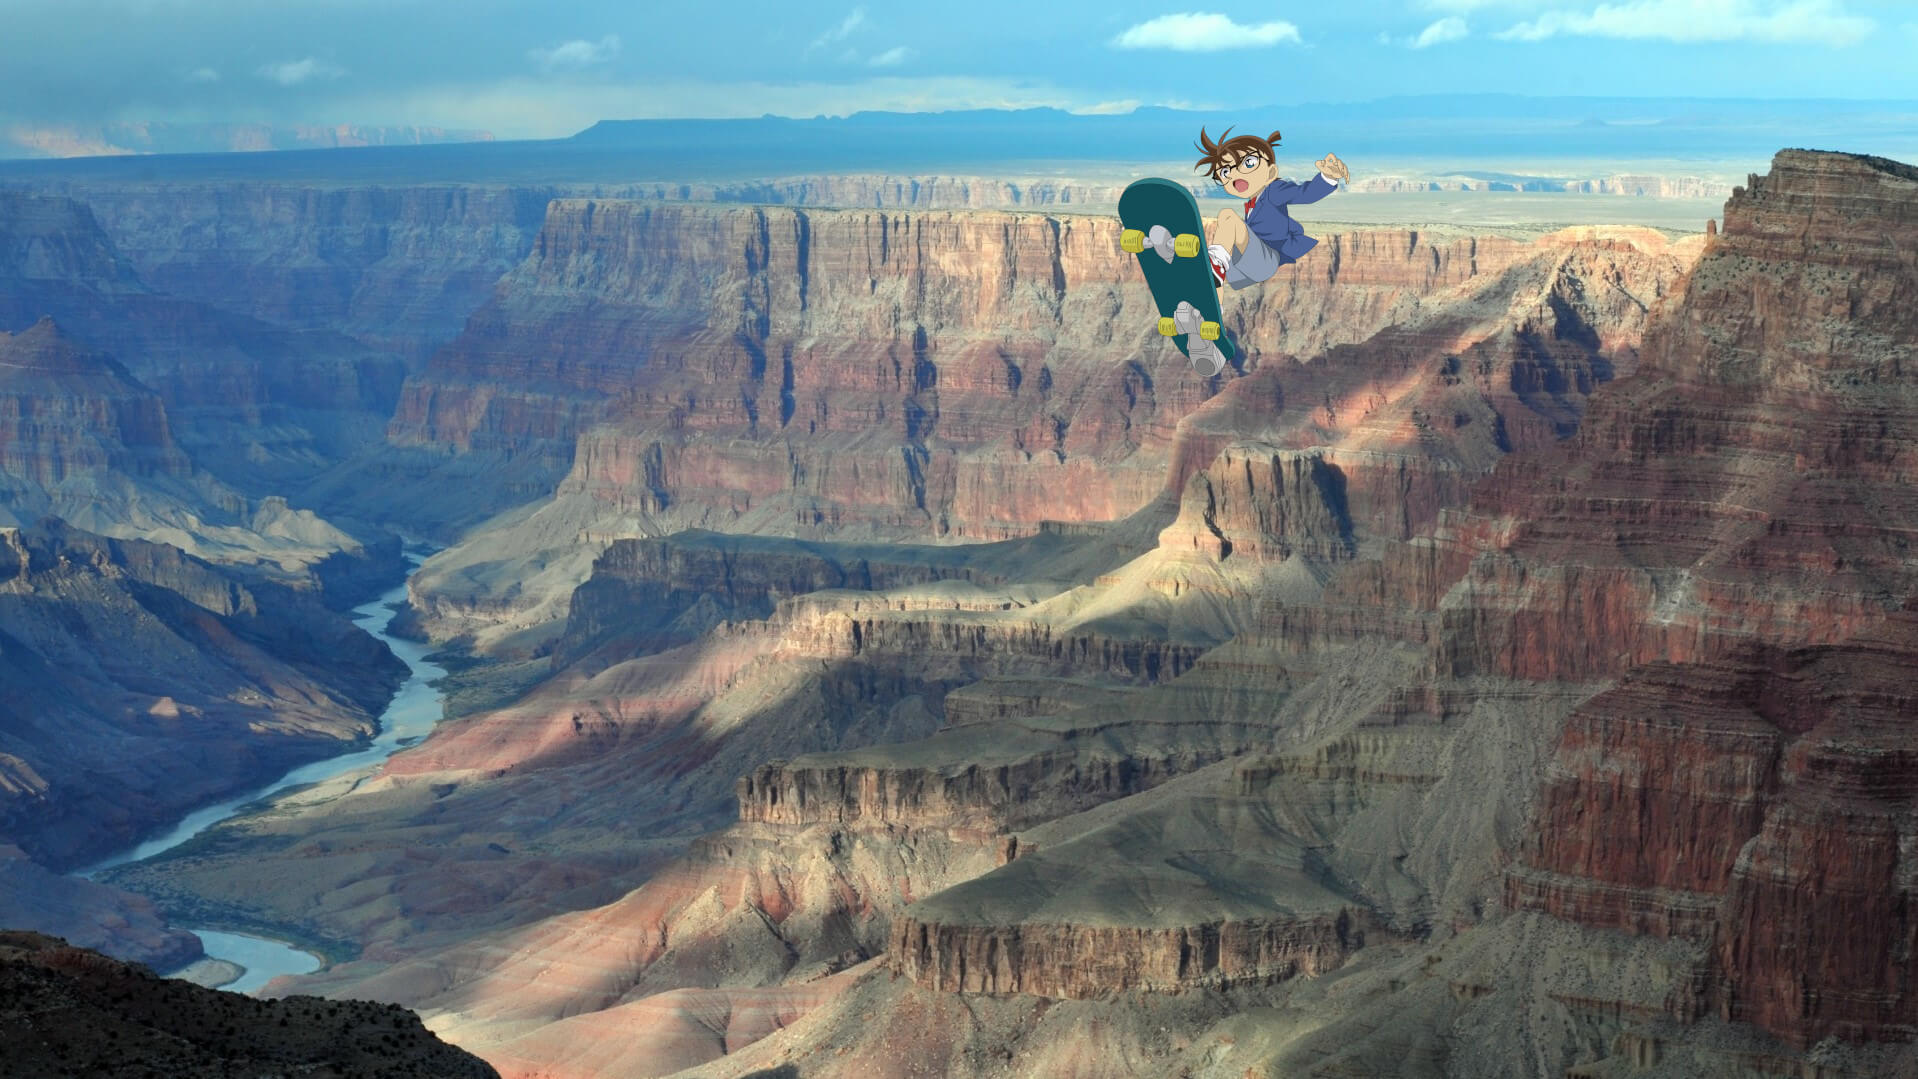 Conan jumping with the turbo skateboard over the Grand Canyon